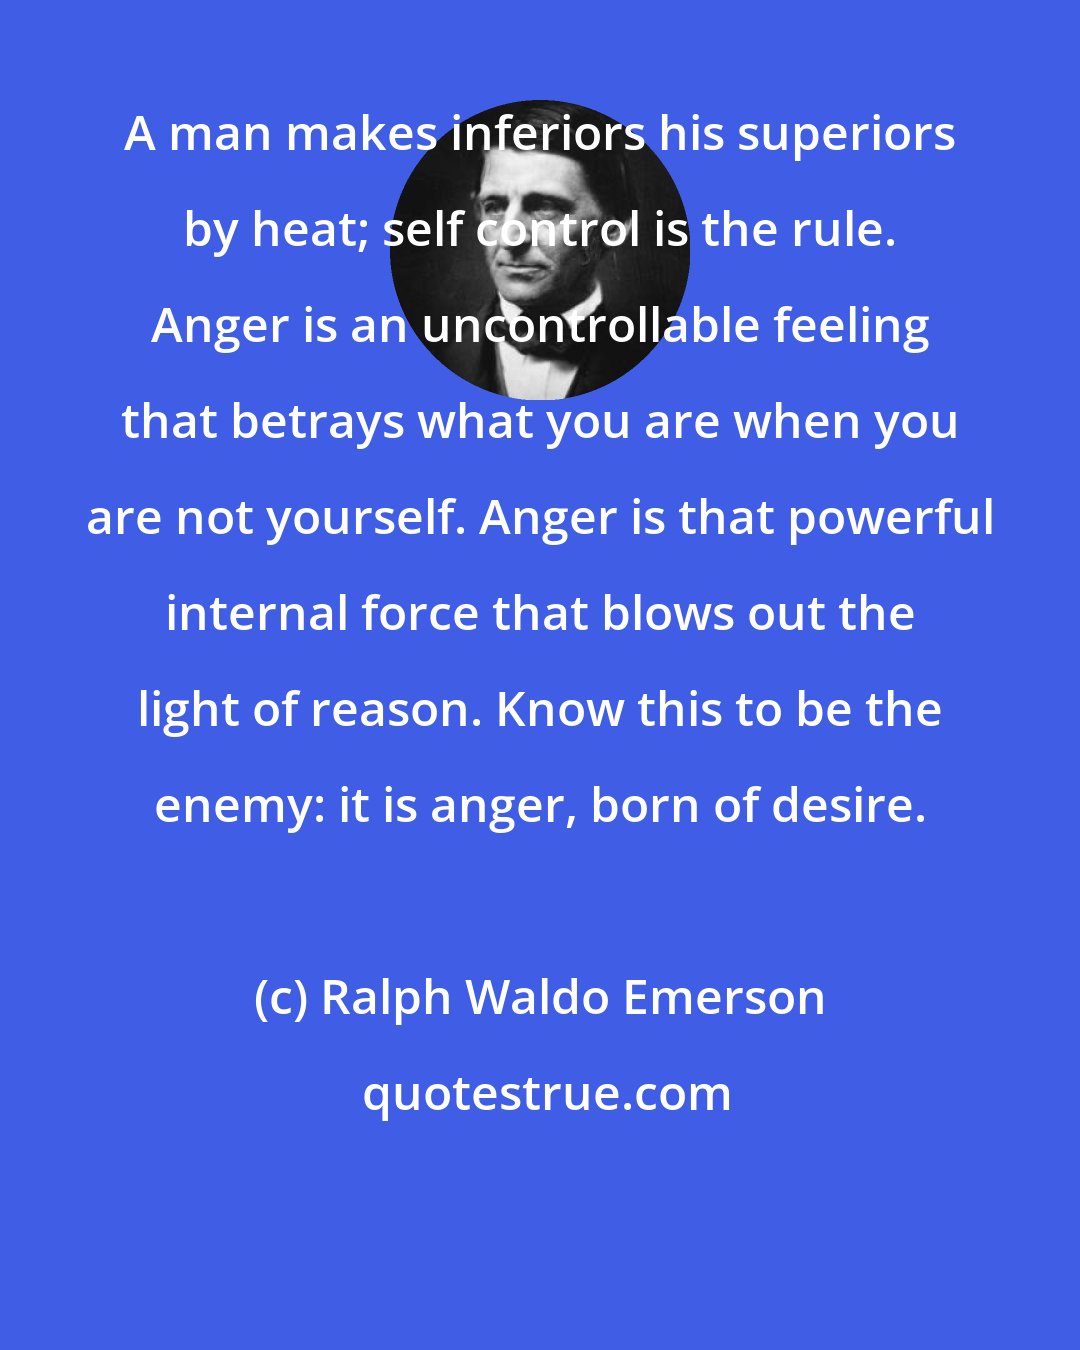 Ralph Waldo Emerson: A man makes inferiors his superiors by heat; self control is the rule. Anger is an uncontrollable feeling that betrays what you are when you are not yourself. Anger is that powerful internal force that blows out the light of reason. Know this to be the enemy: it is anger, born of desire.